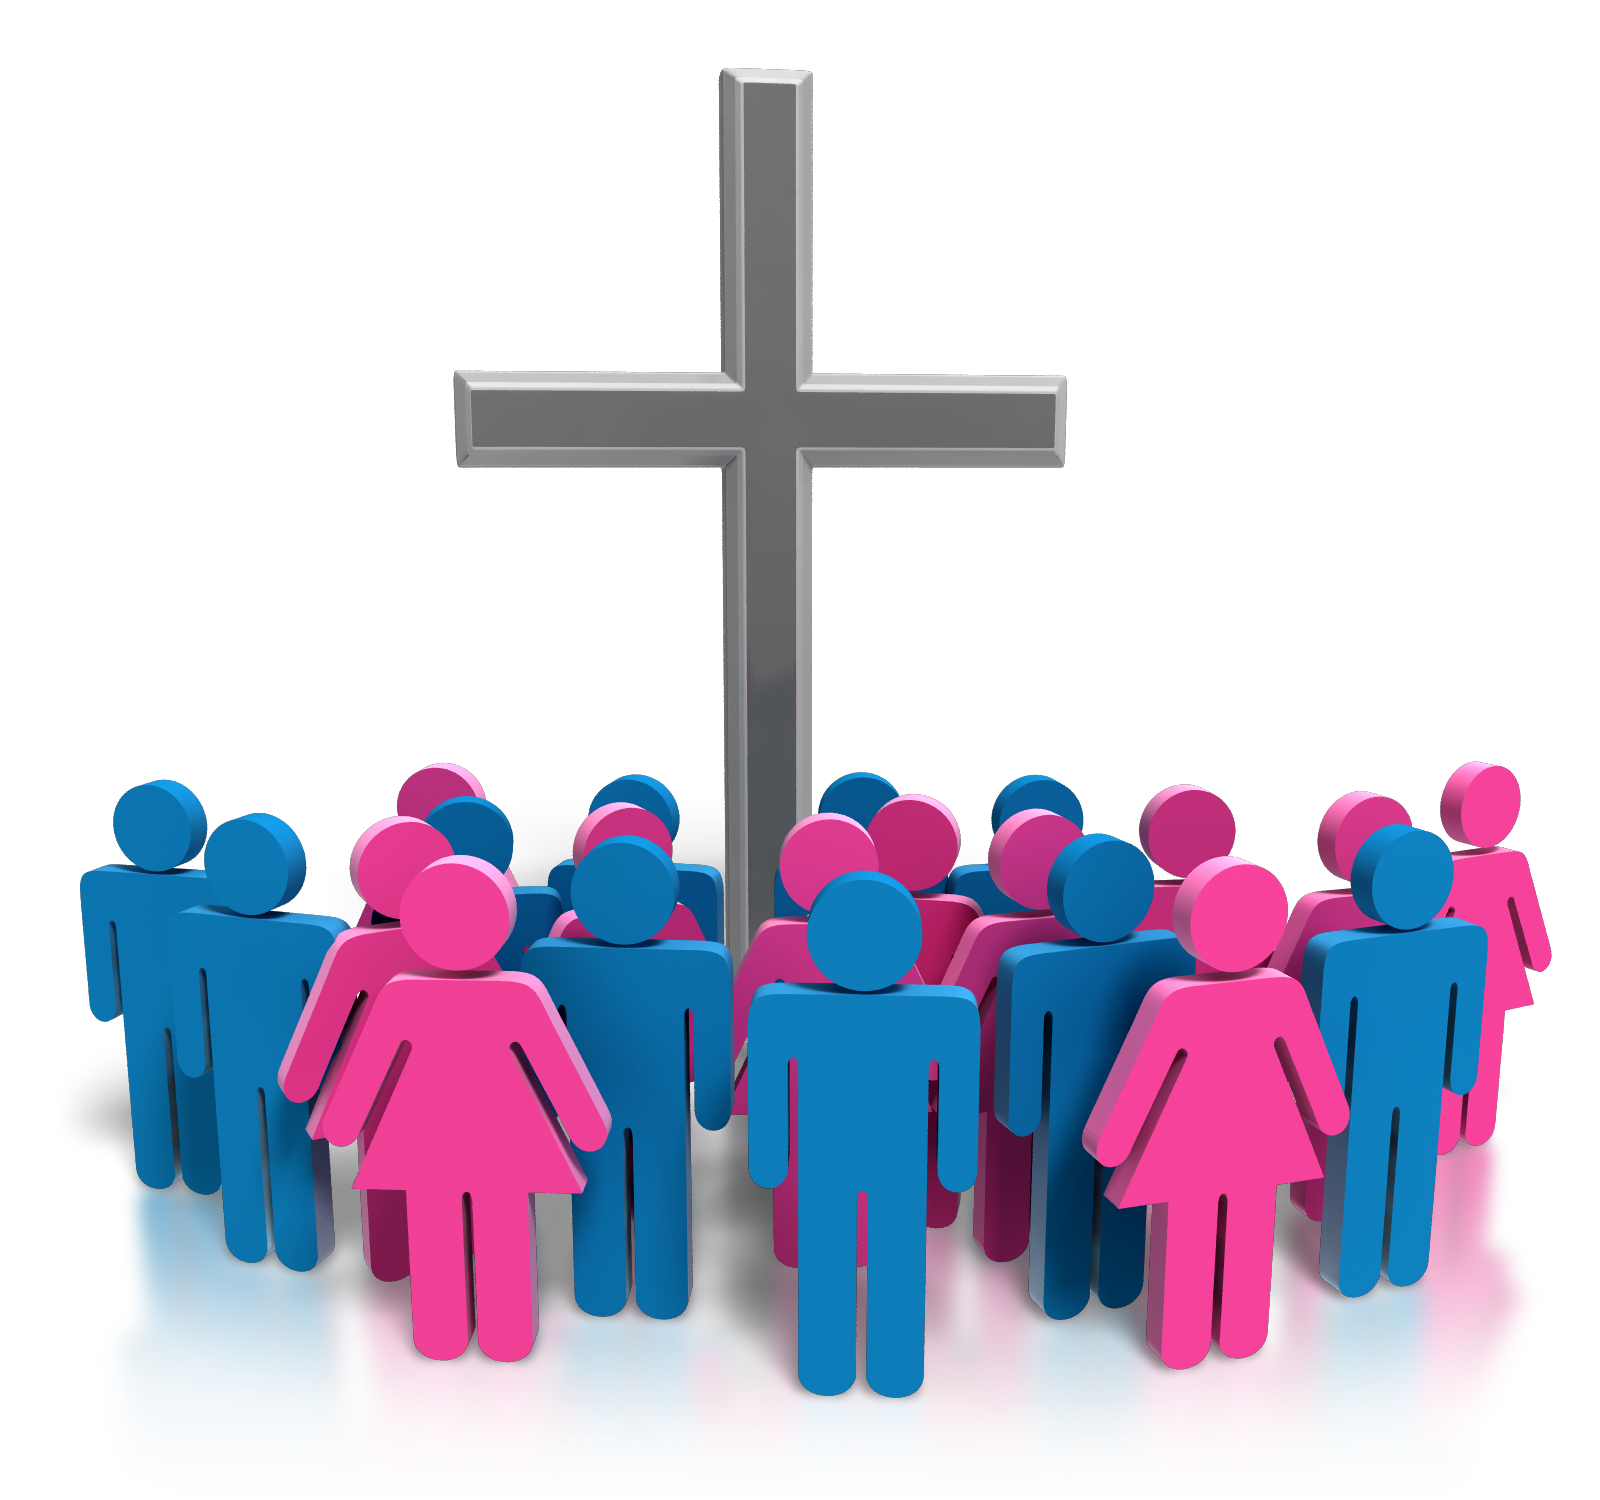 Church Worship With Us Clipart